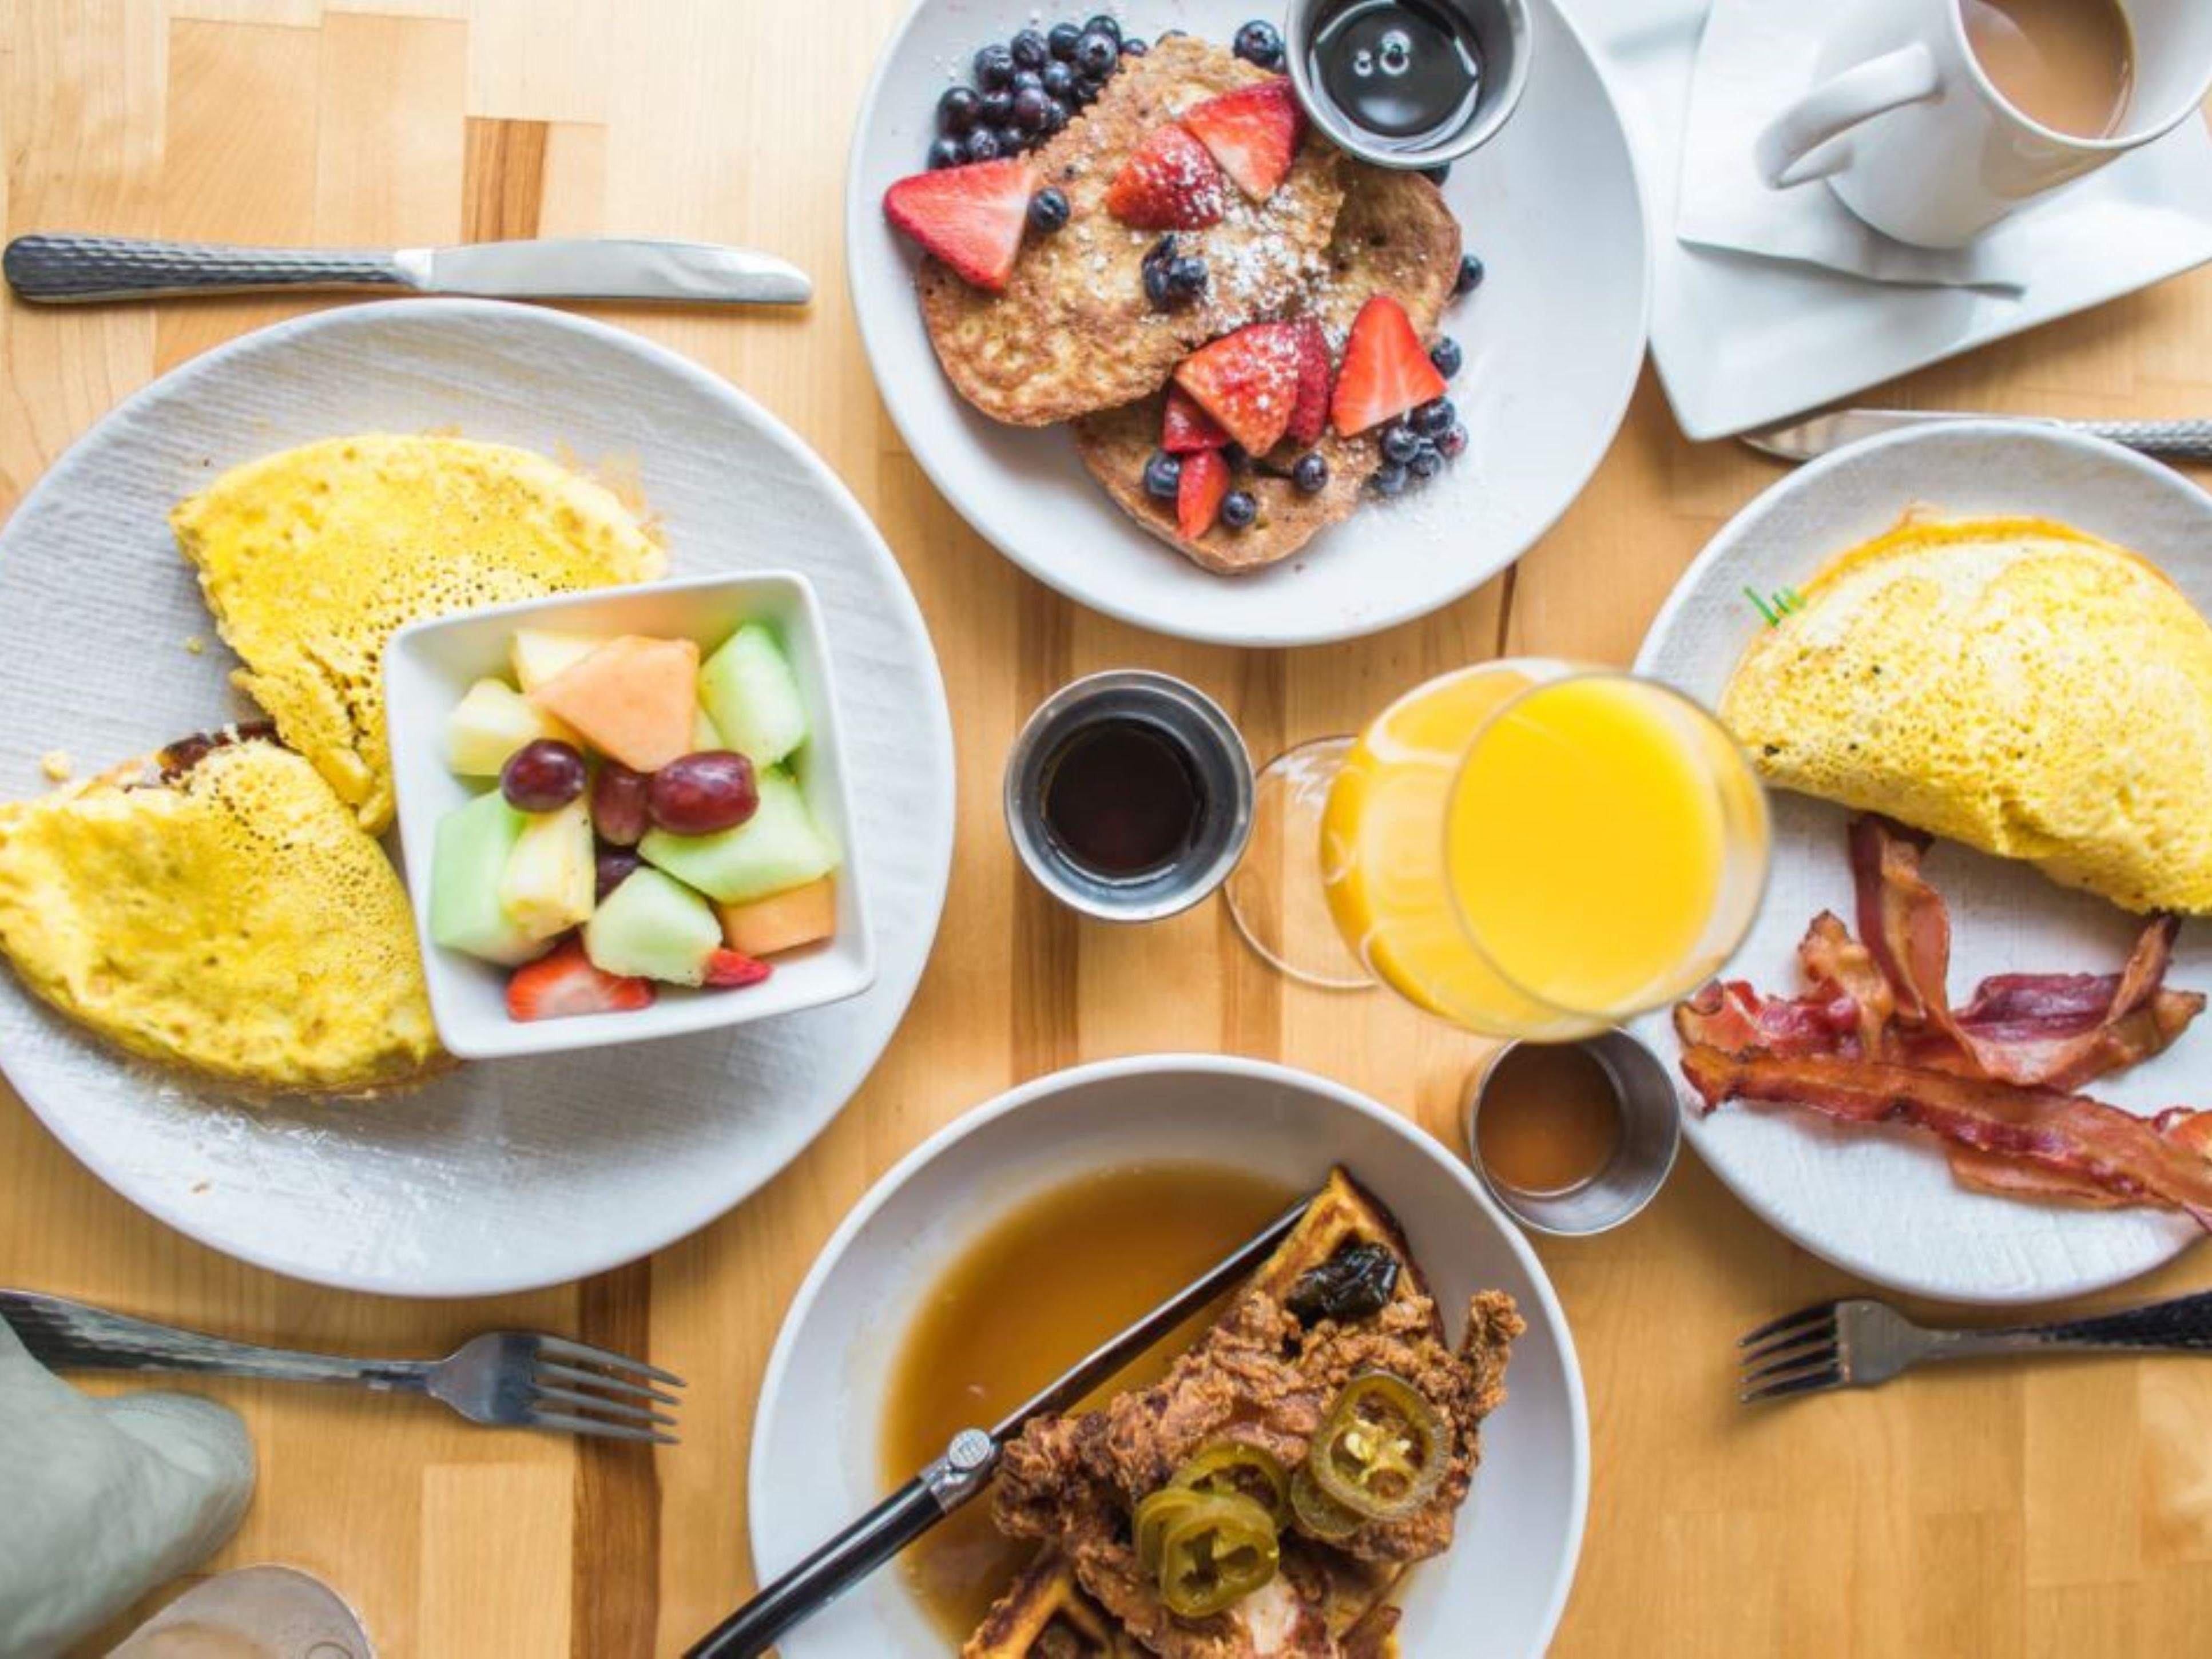 We are now serving breakfast for all of our guests to enjoy. Breakfast is made to order off our abundant menu ranging from hot pancakes, eggs, breakfast meats, breakfast breads and beverages. Hours vary by day of week. 